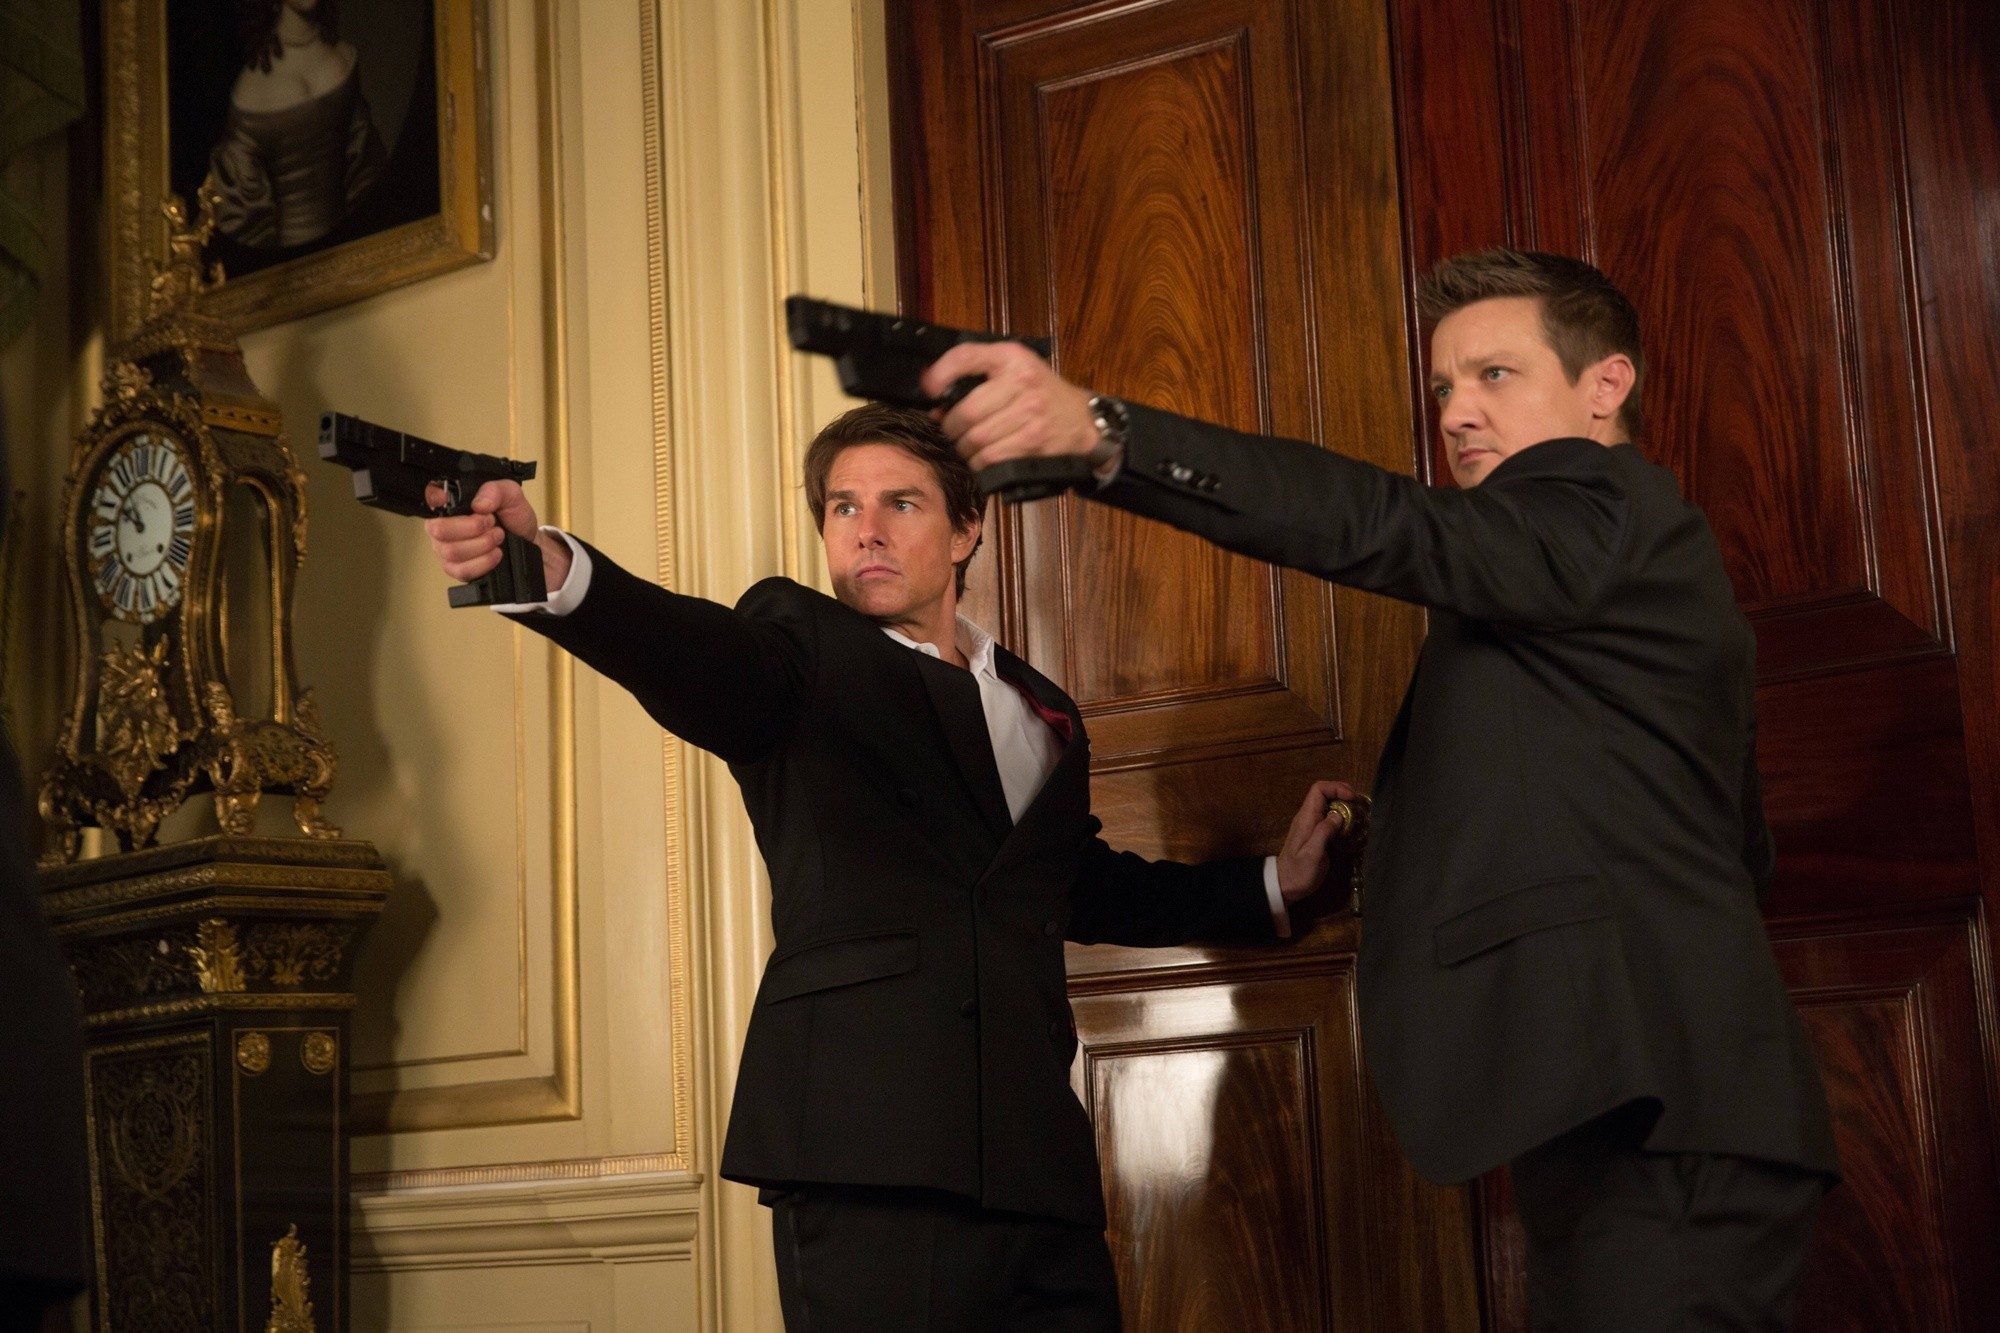 Tom Cruise stars as Ethan Hunt and Jeremy Renner stars as William Brandt in Paramount Pictures' Mission: Impossible Rogue Nation (2015)